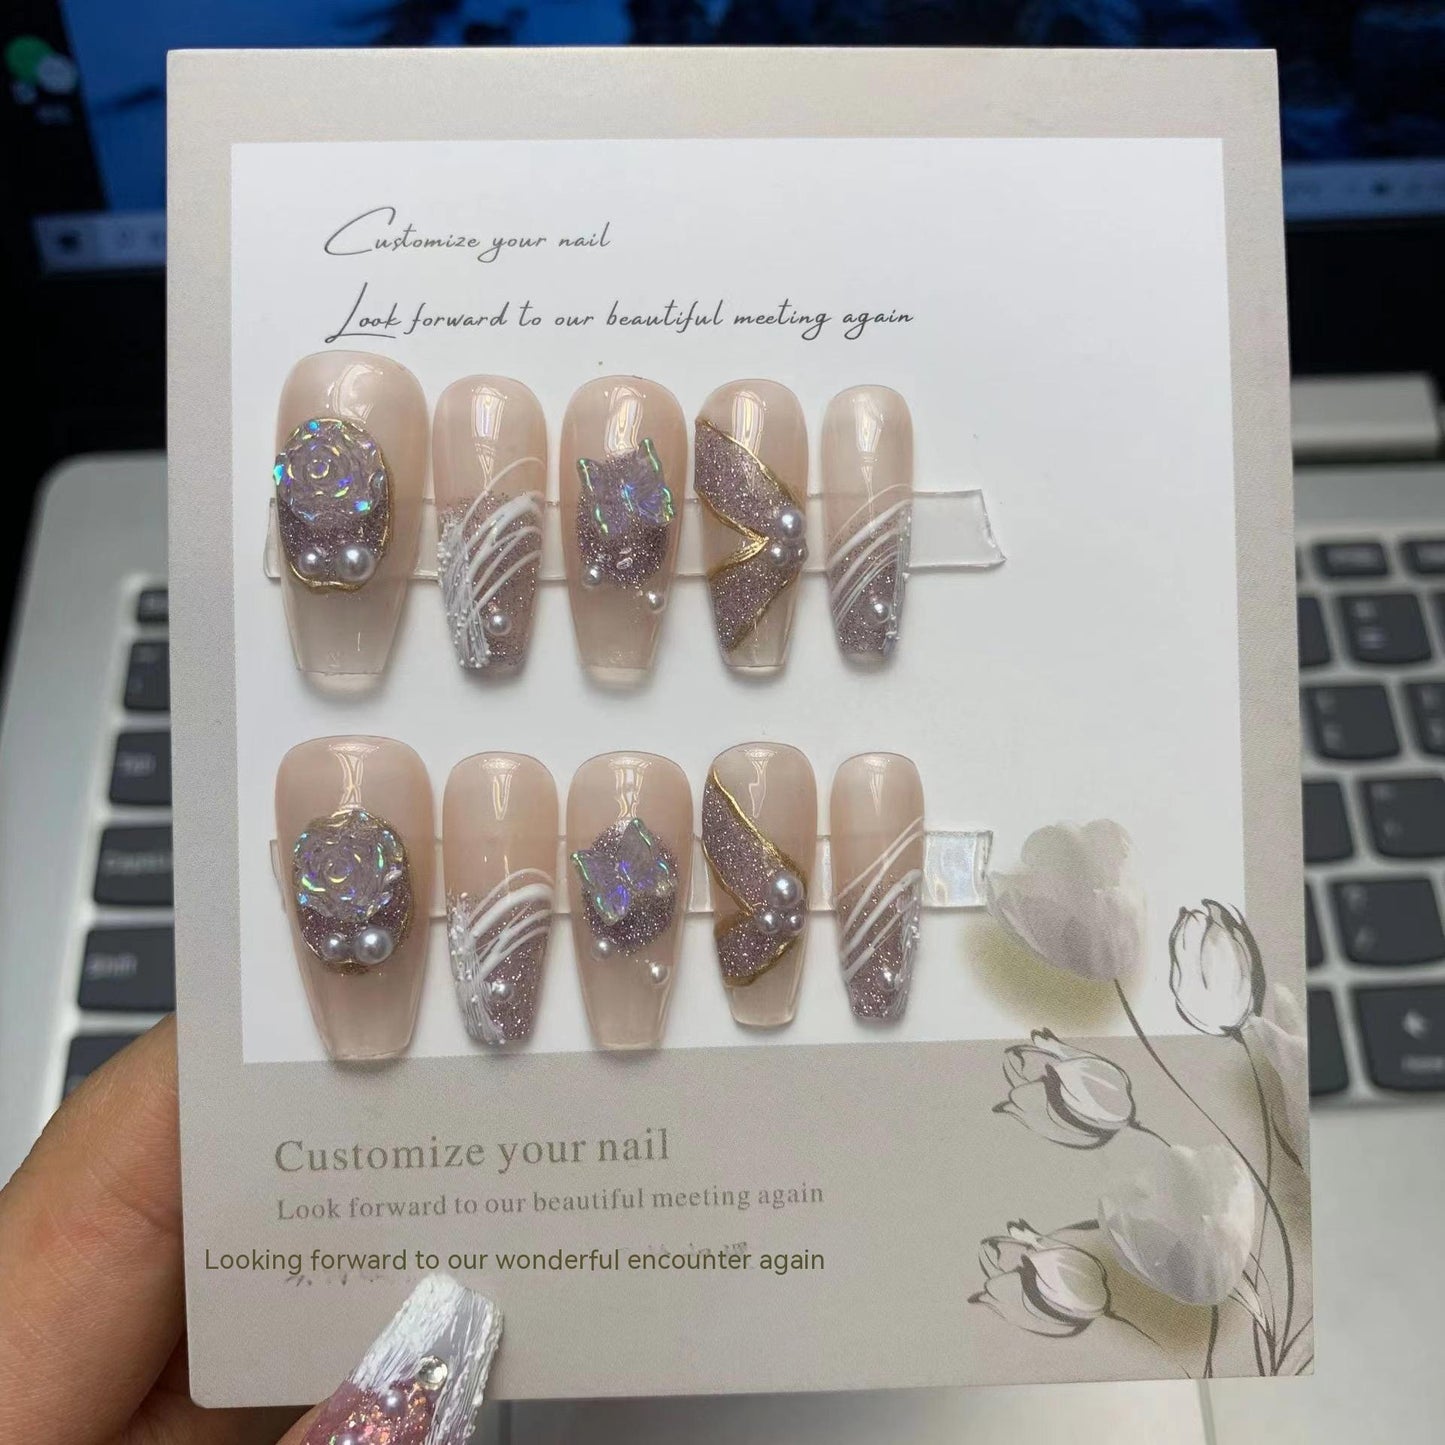 Camellia Series Hand-worn Armor Removable Nail Stickers